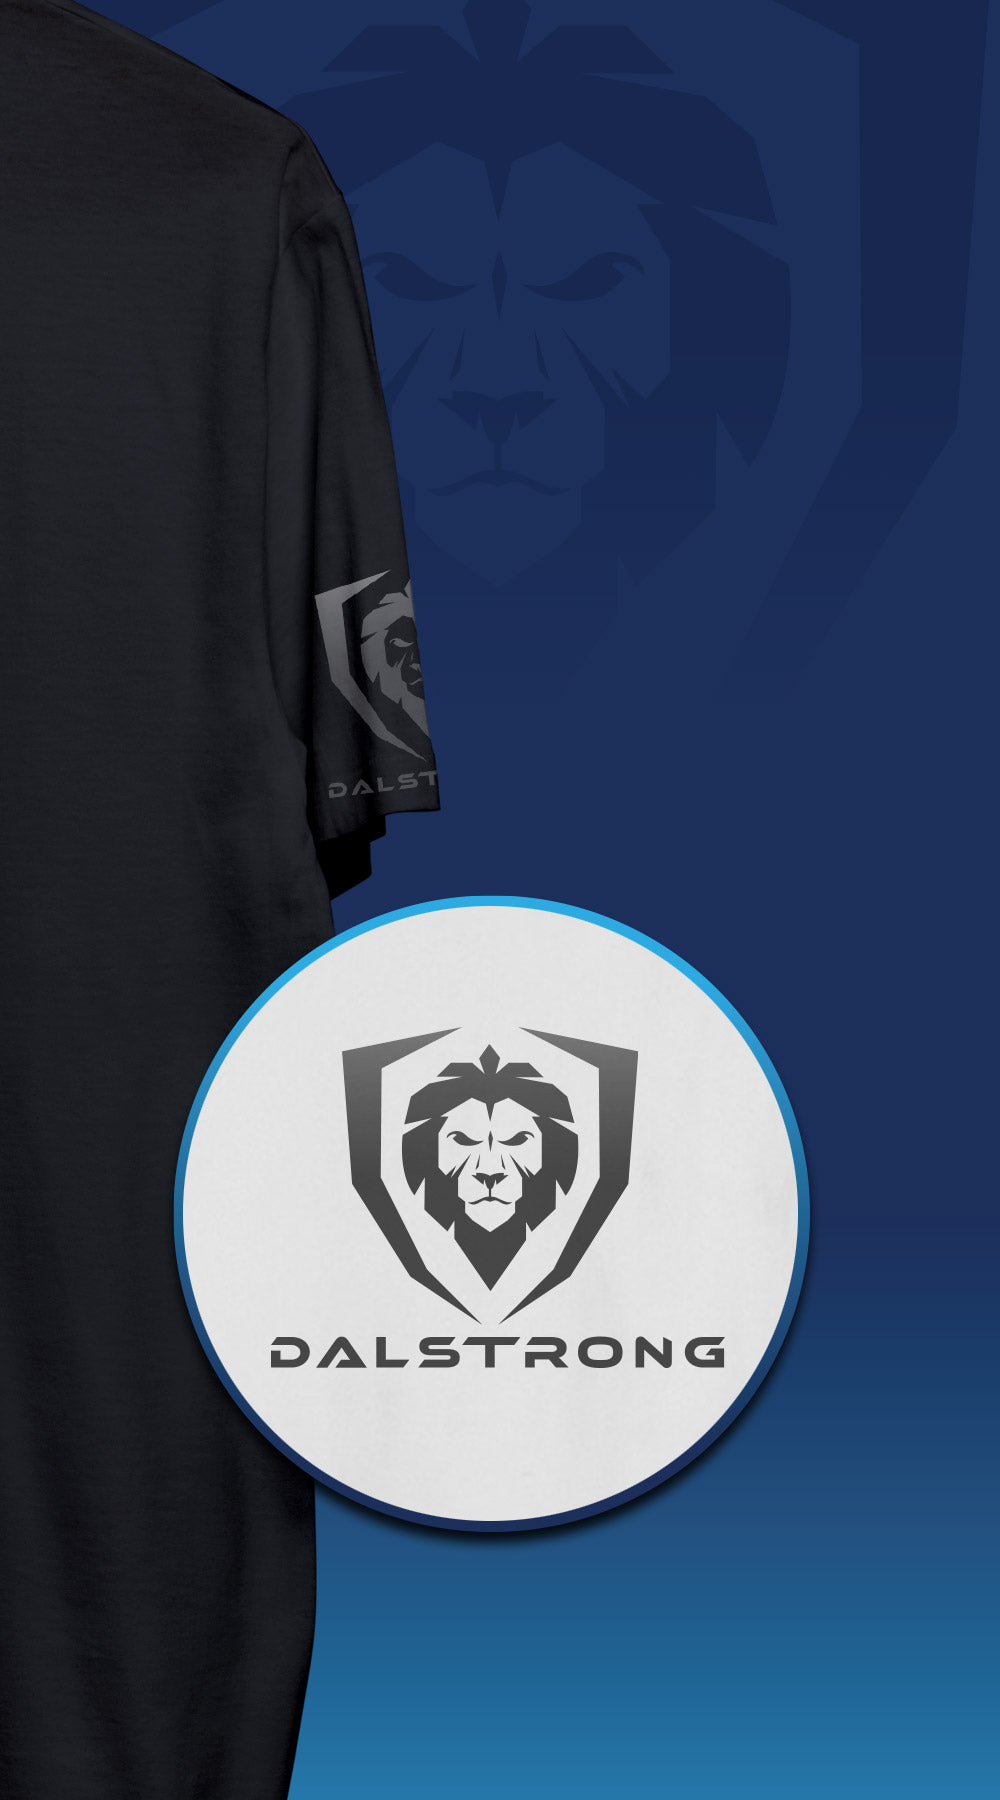 Dalstrong skull crusher tee black with dalstrong name and logo.